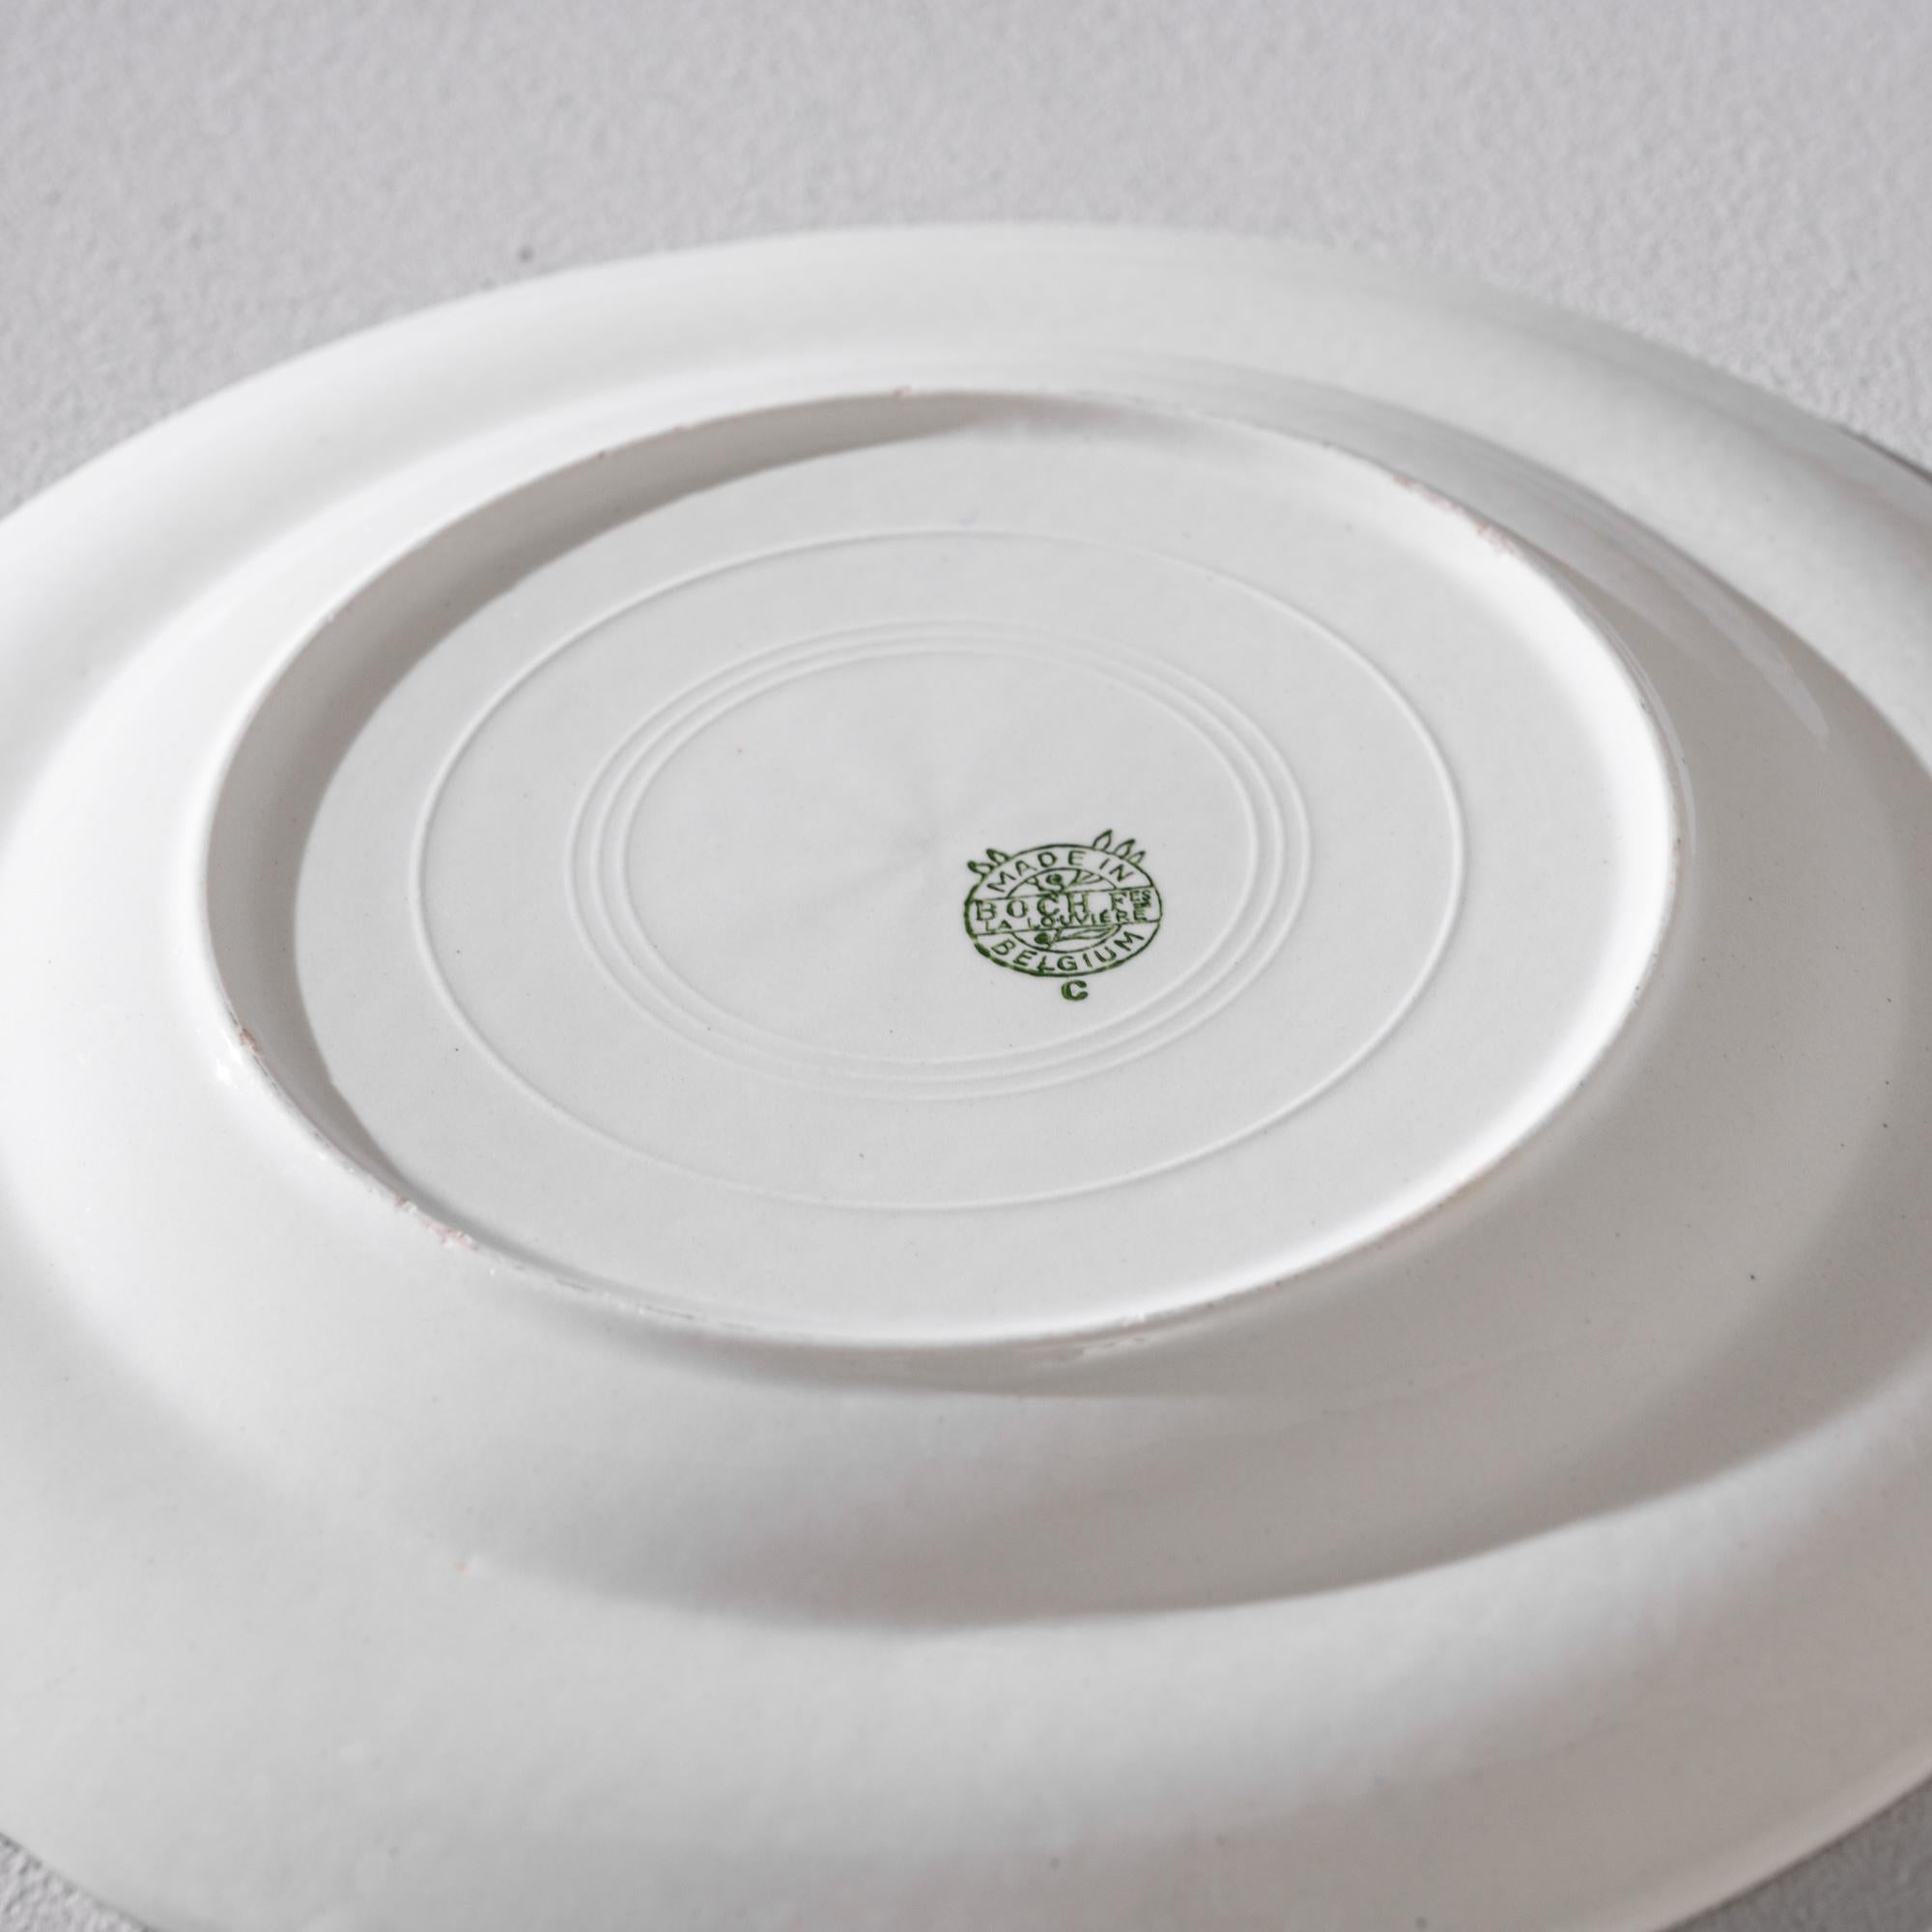 This porcelain plate was manufactured circa 1960 in Belgium by the legendary ceramic company Boch, active in the European market since the 19th century. The delicacy of white china is punctuated by the bold yet gentle flower composition featured in